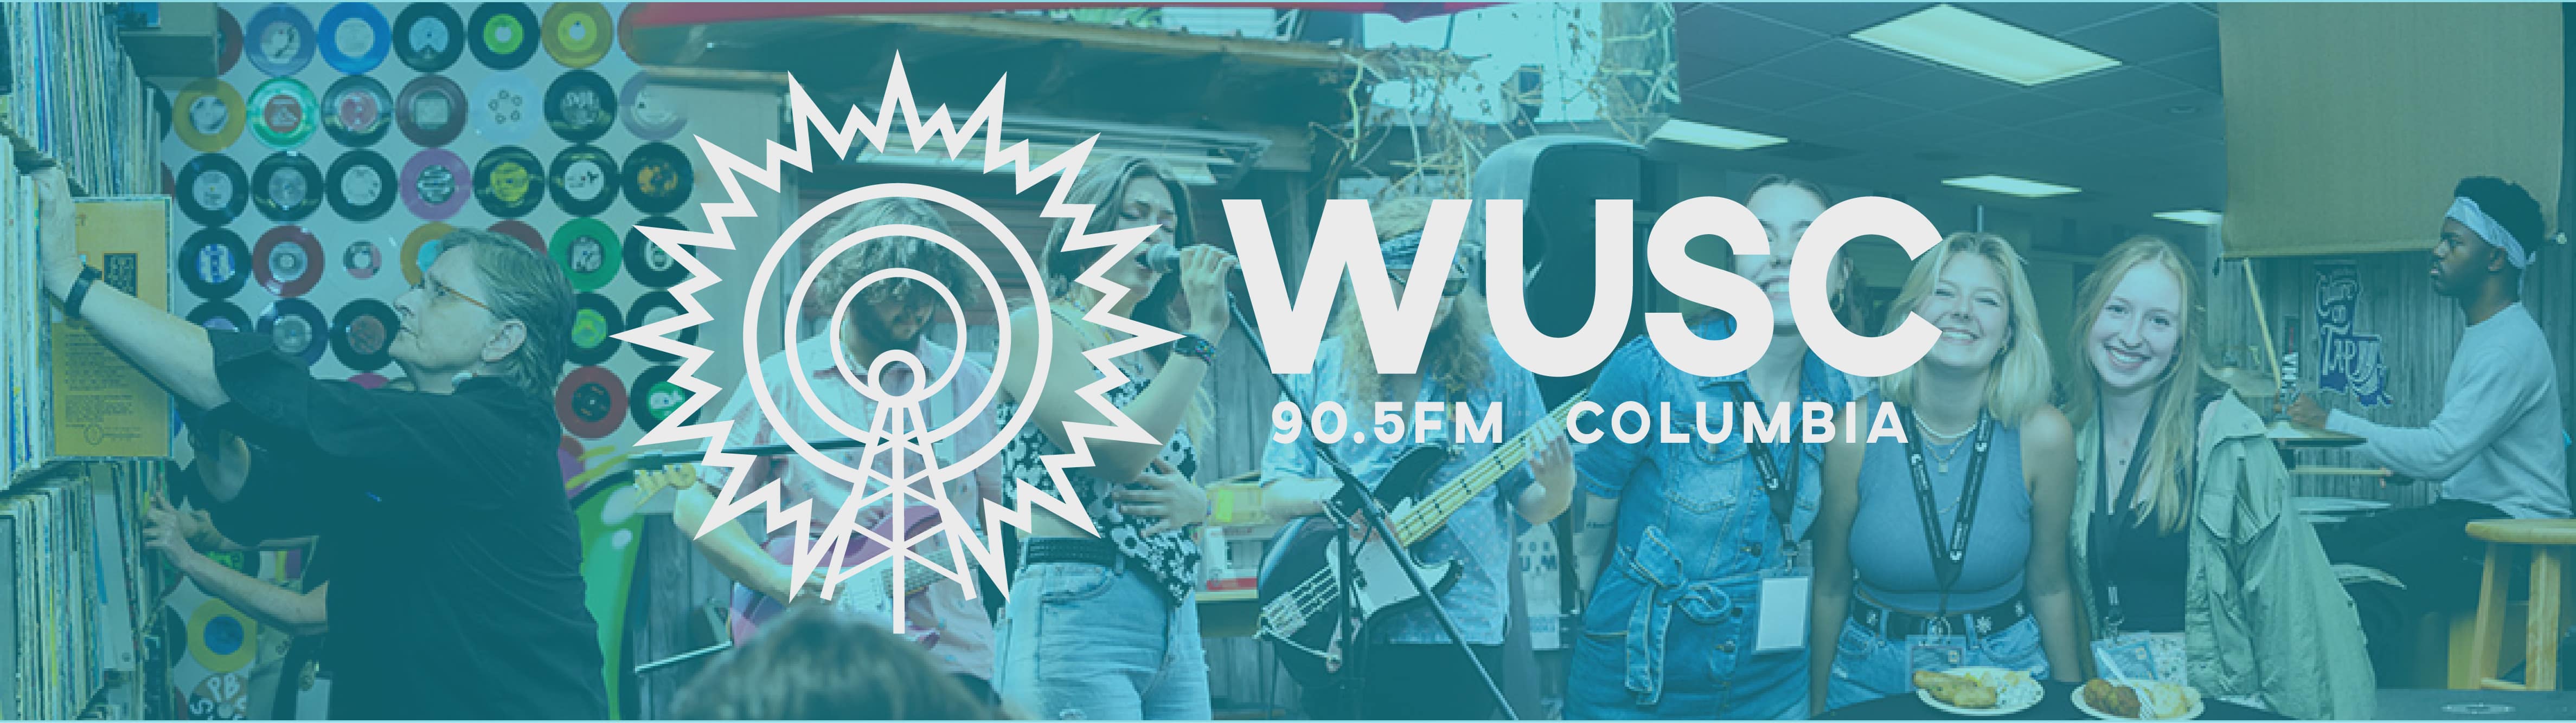 photo collage with WUSC logo